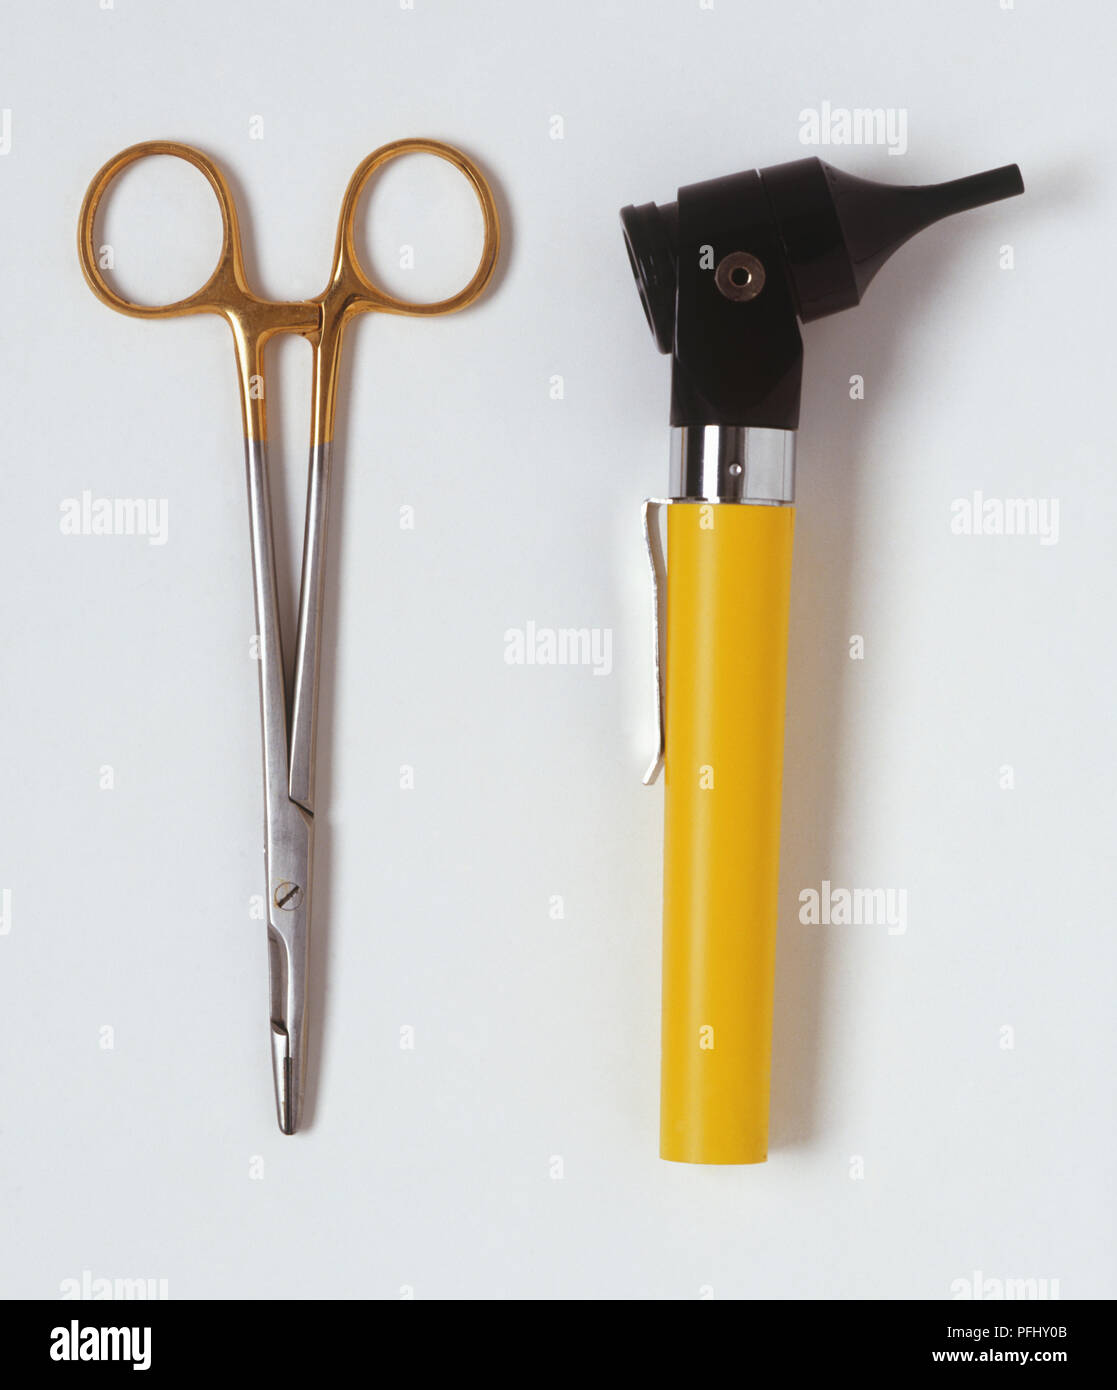 Otoscope with yellow handle and long thin scissors, close up. Stock Photo